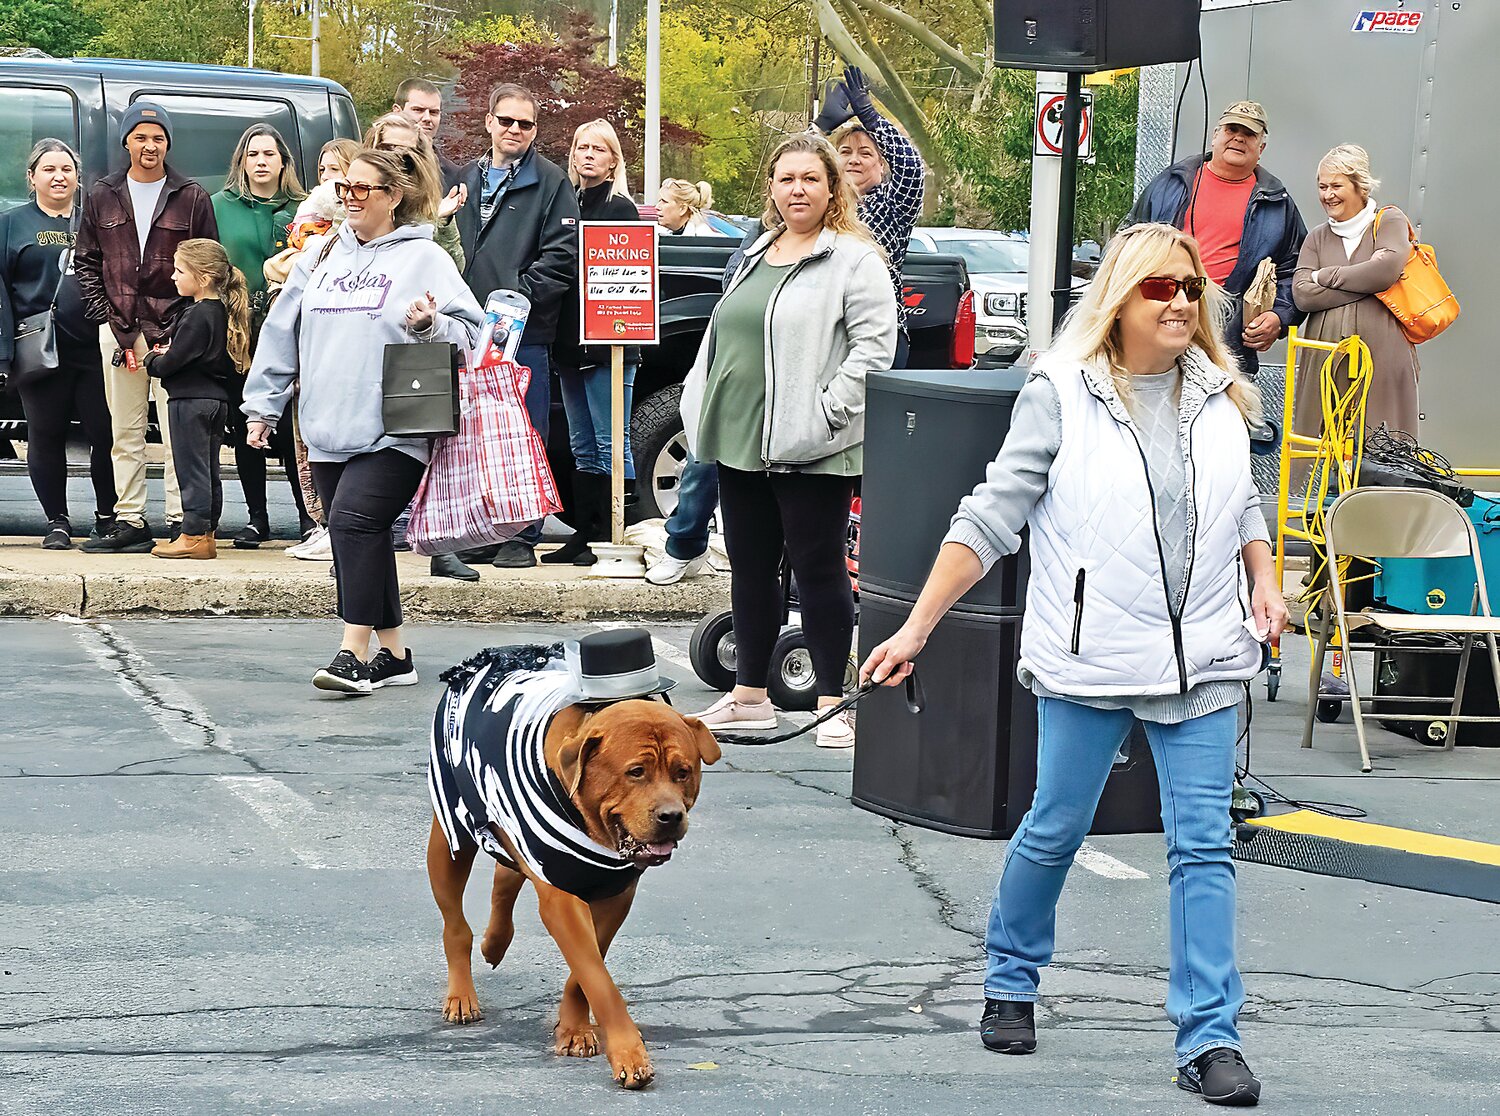 Dogs and owners strut their costumes in front of the judges.